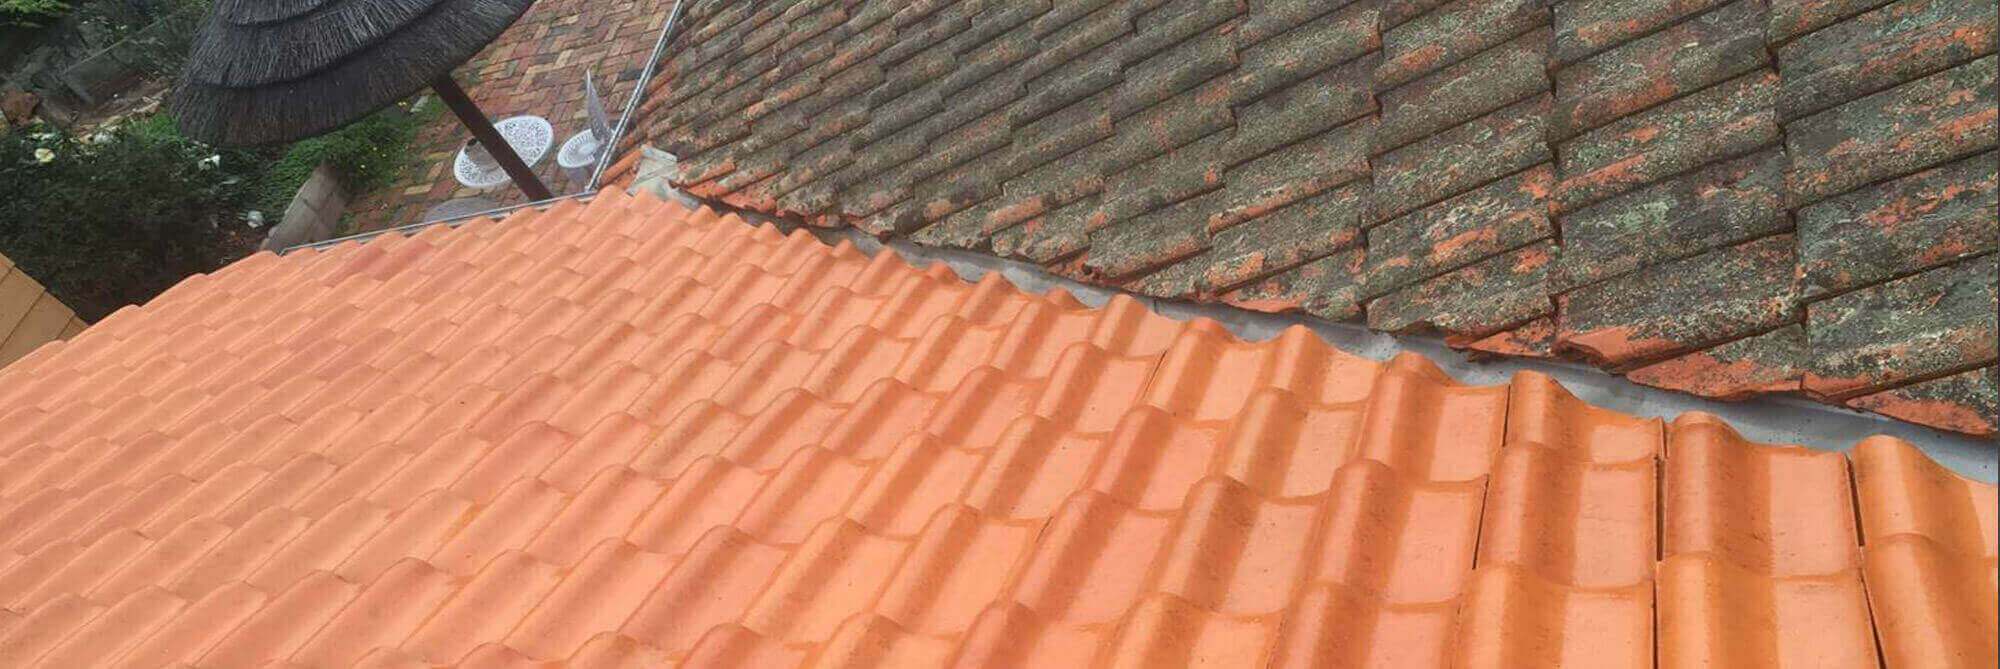 Roof Cleaning Perth